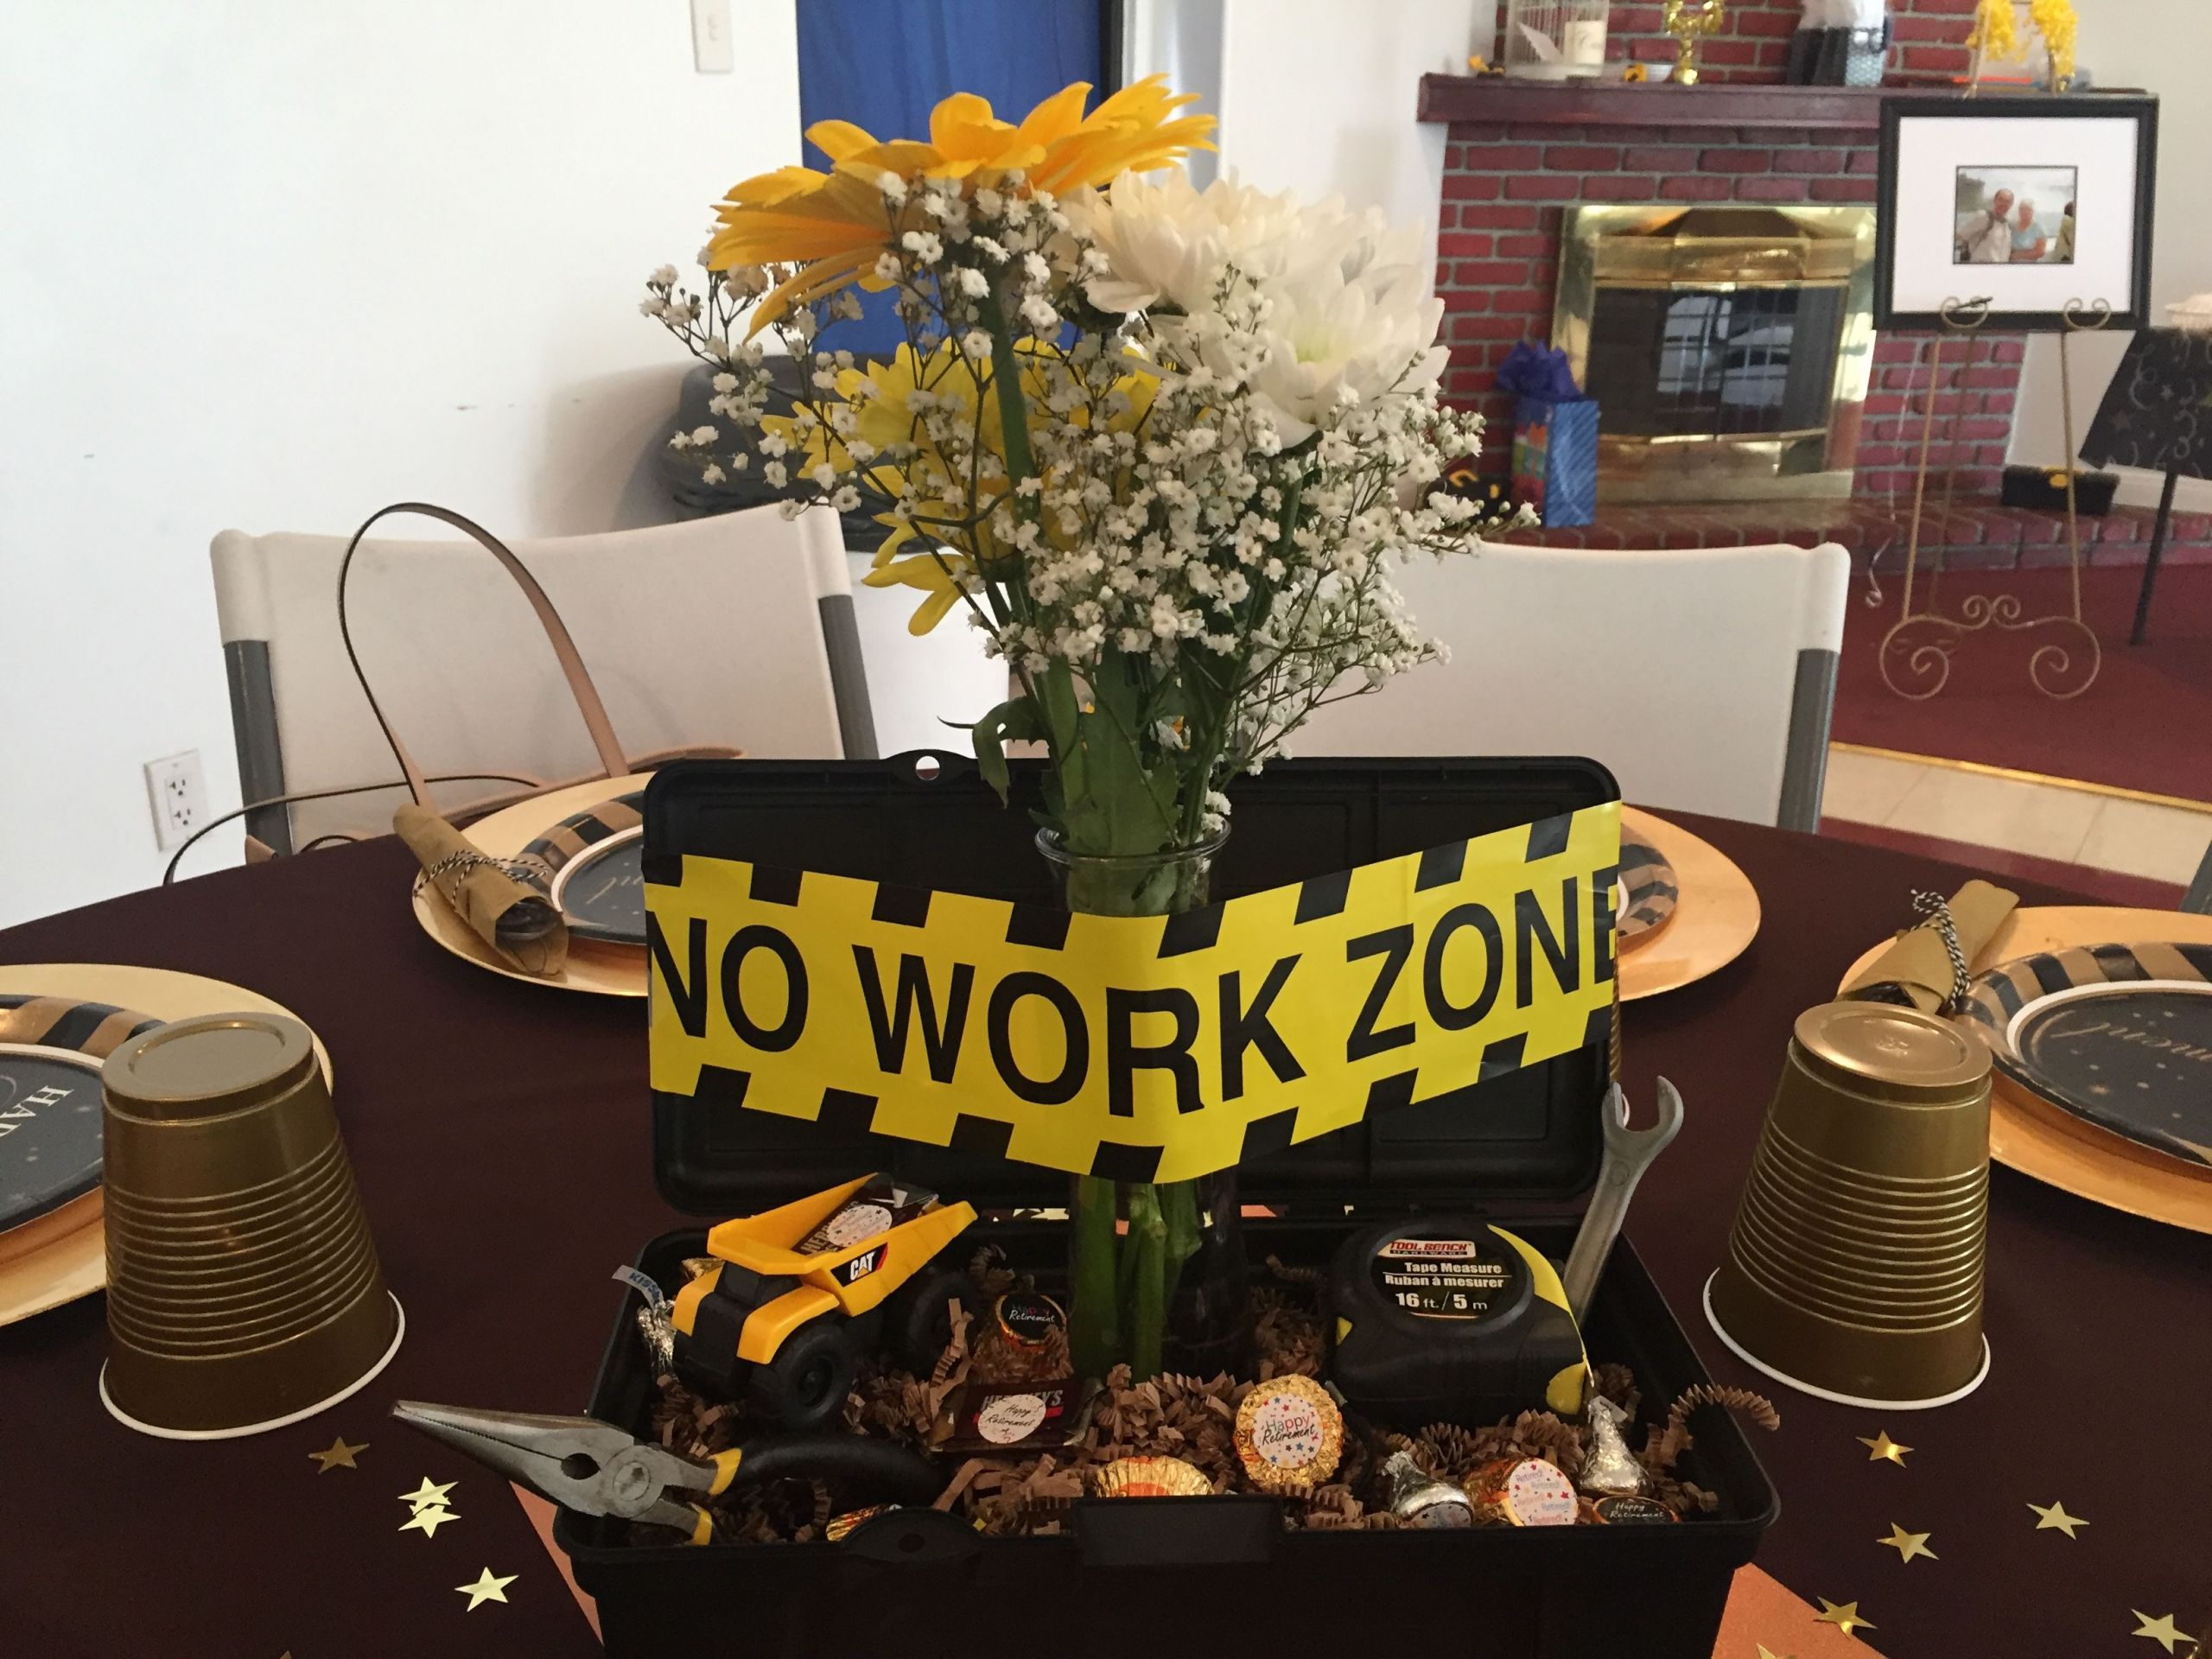 Retirement Party Decoration Ideas
 I couldn t find a retirement party centerpiece for a